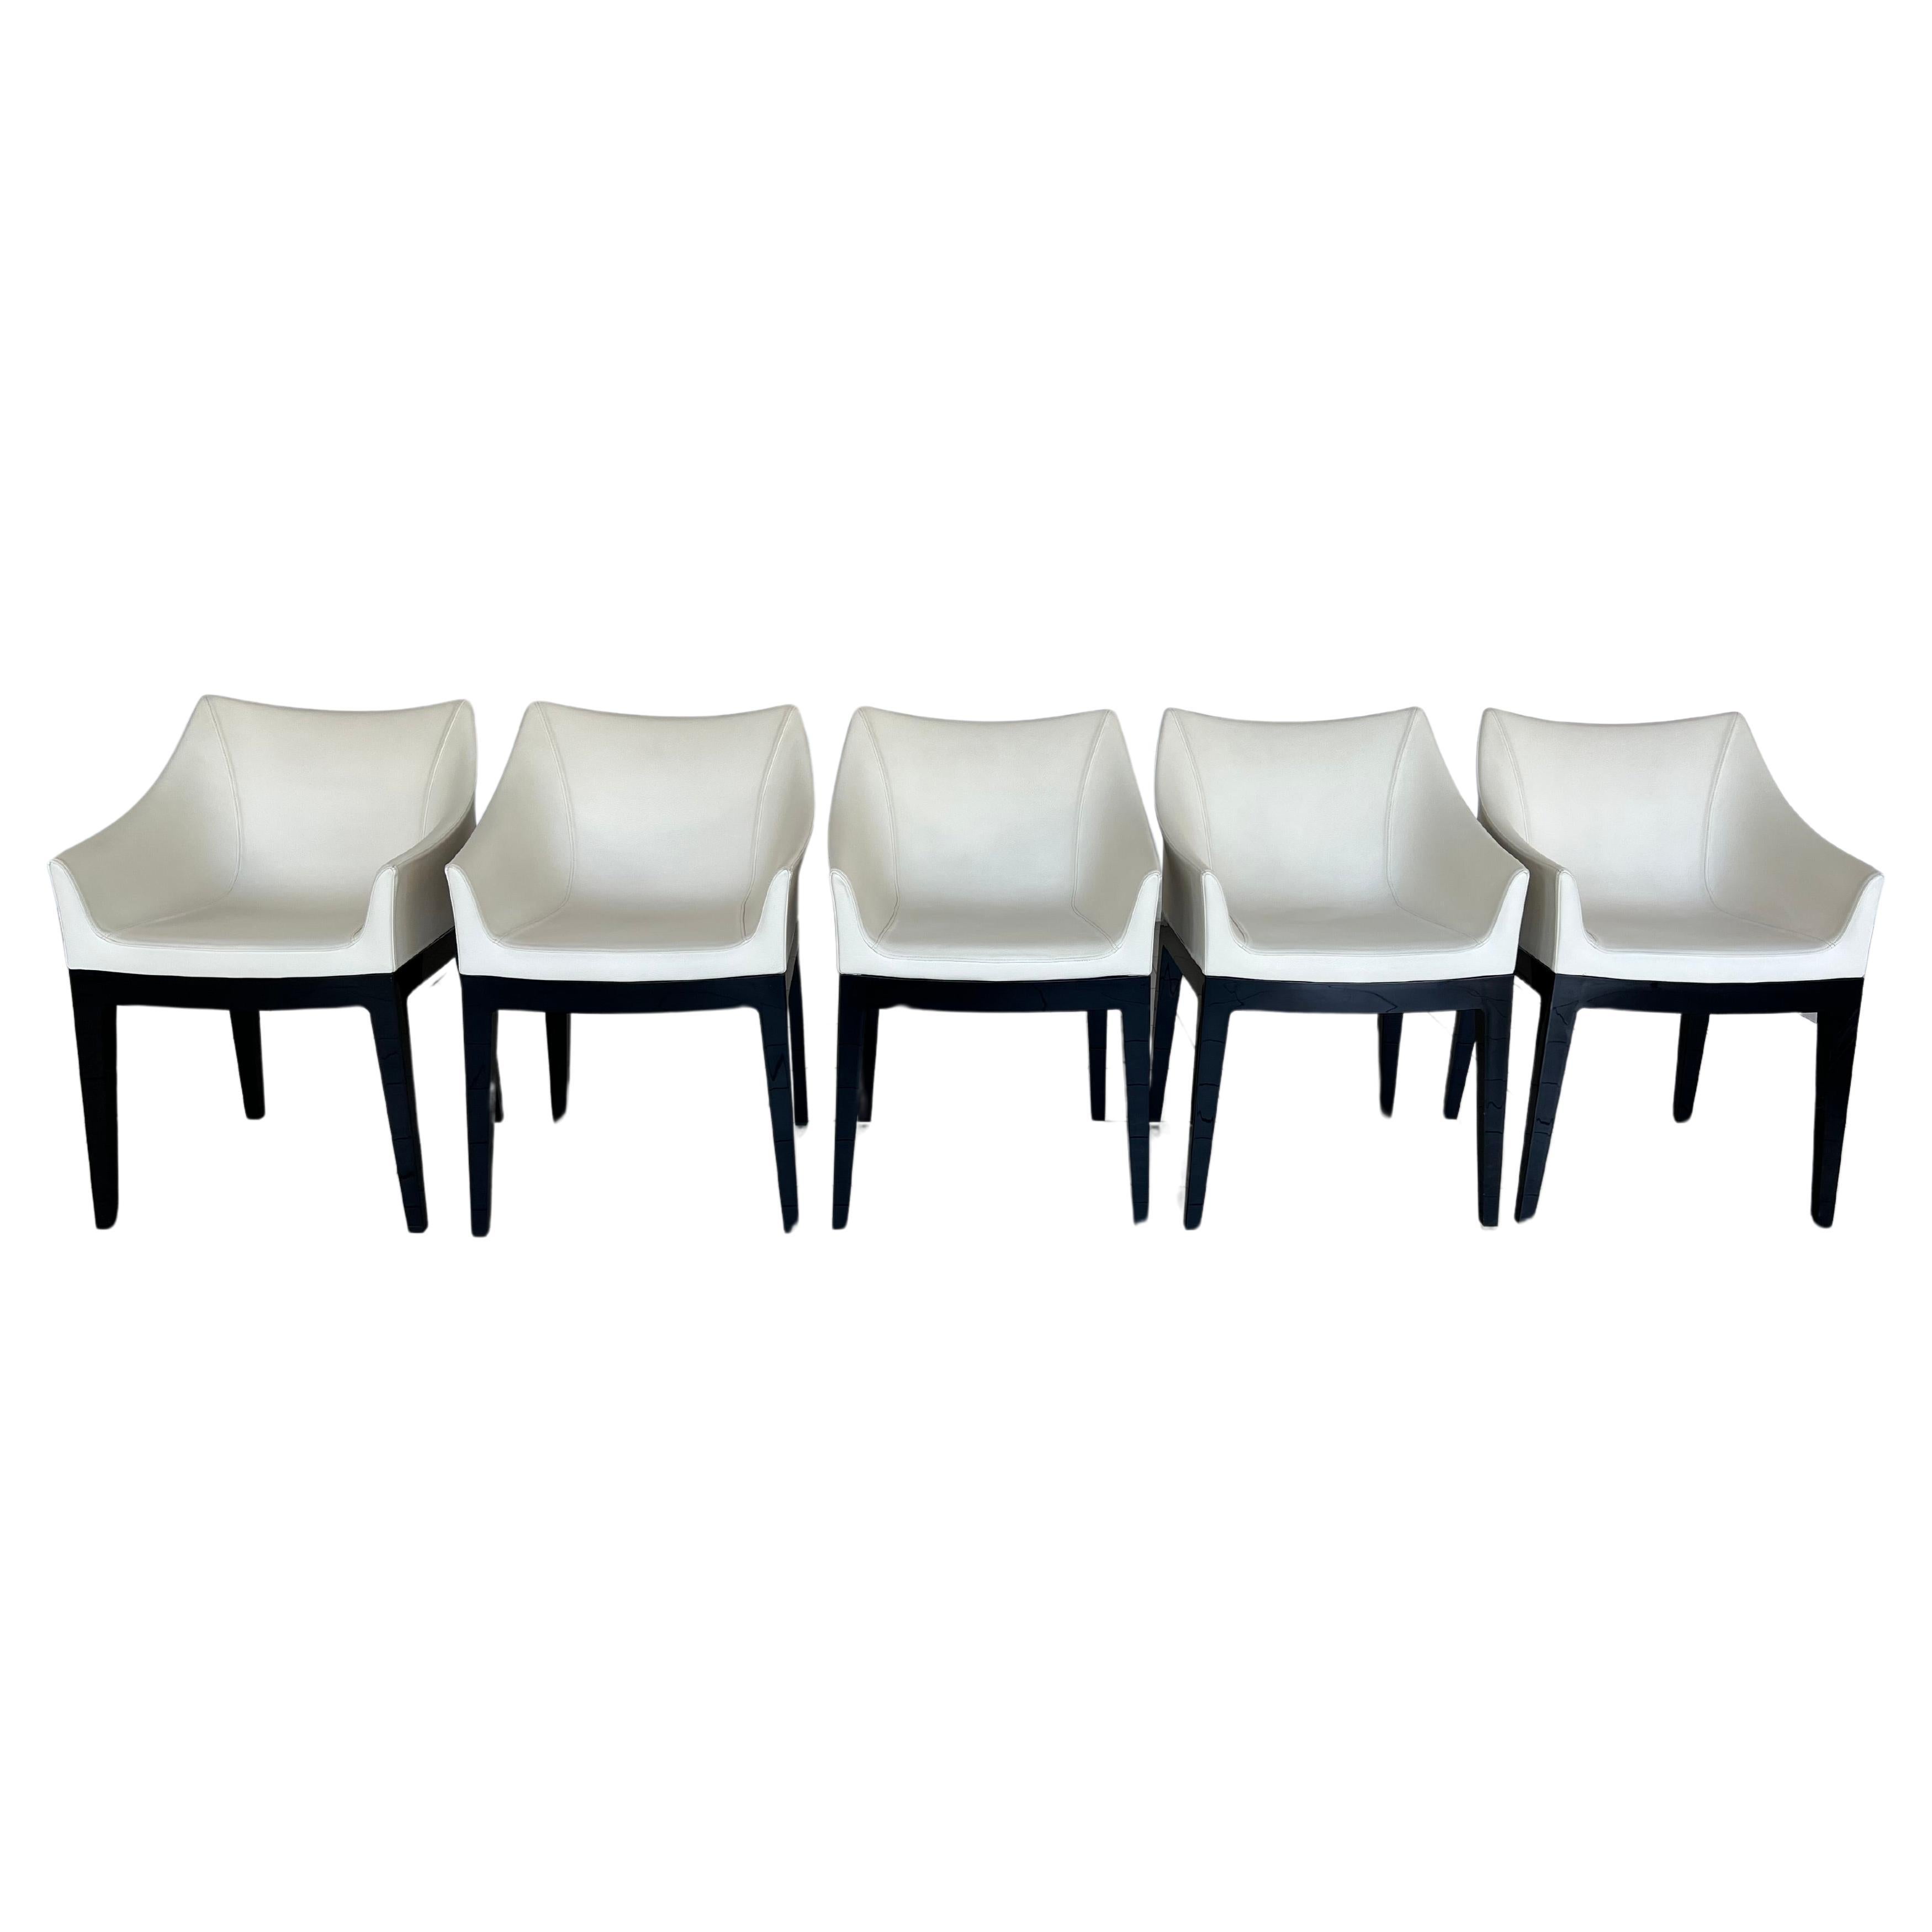 Original Mademoiselle Leather Chairs by Philippe Starck for Kartell - Set of 5 For Sale